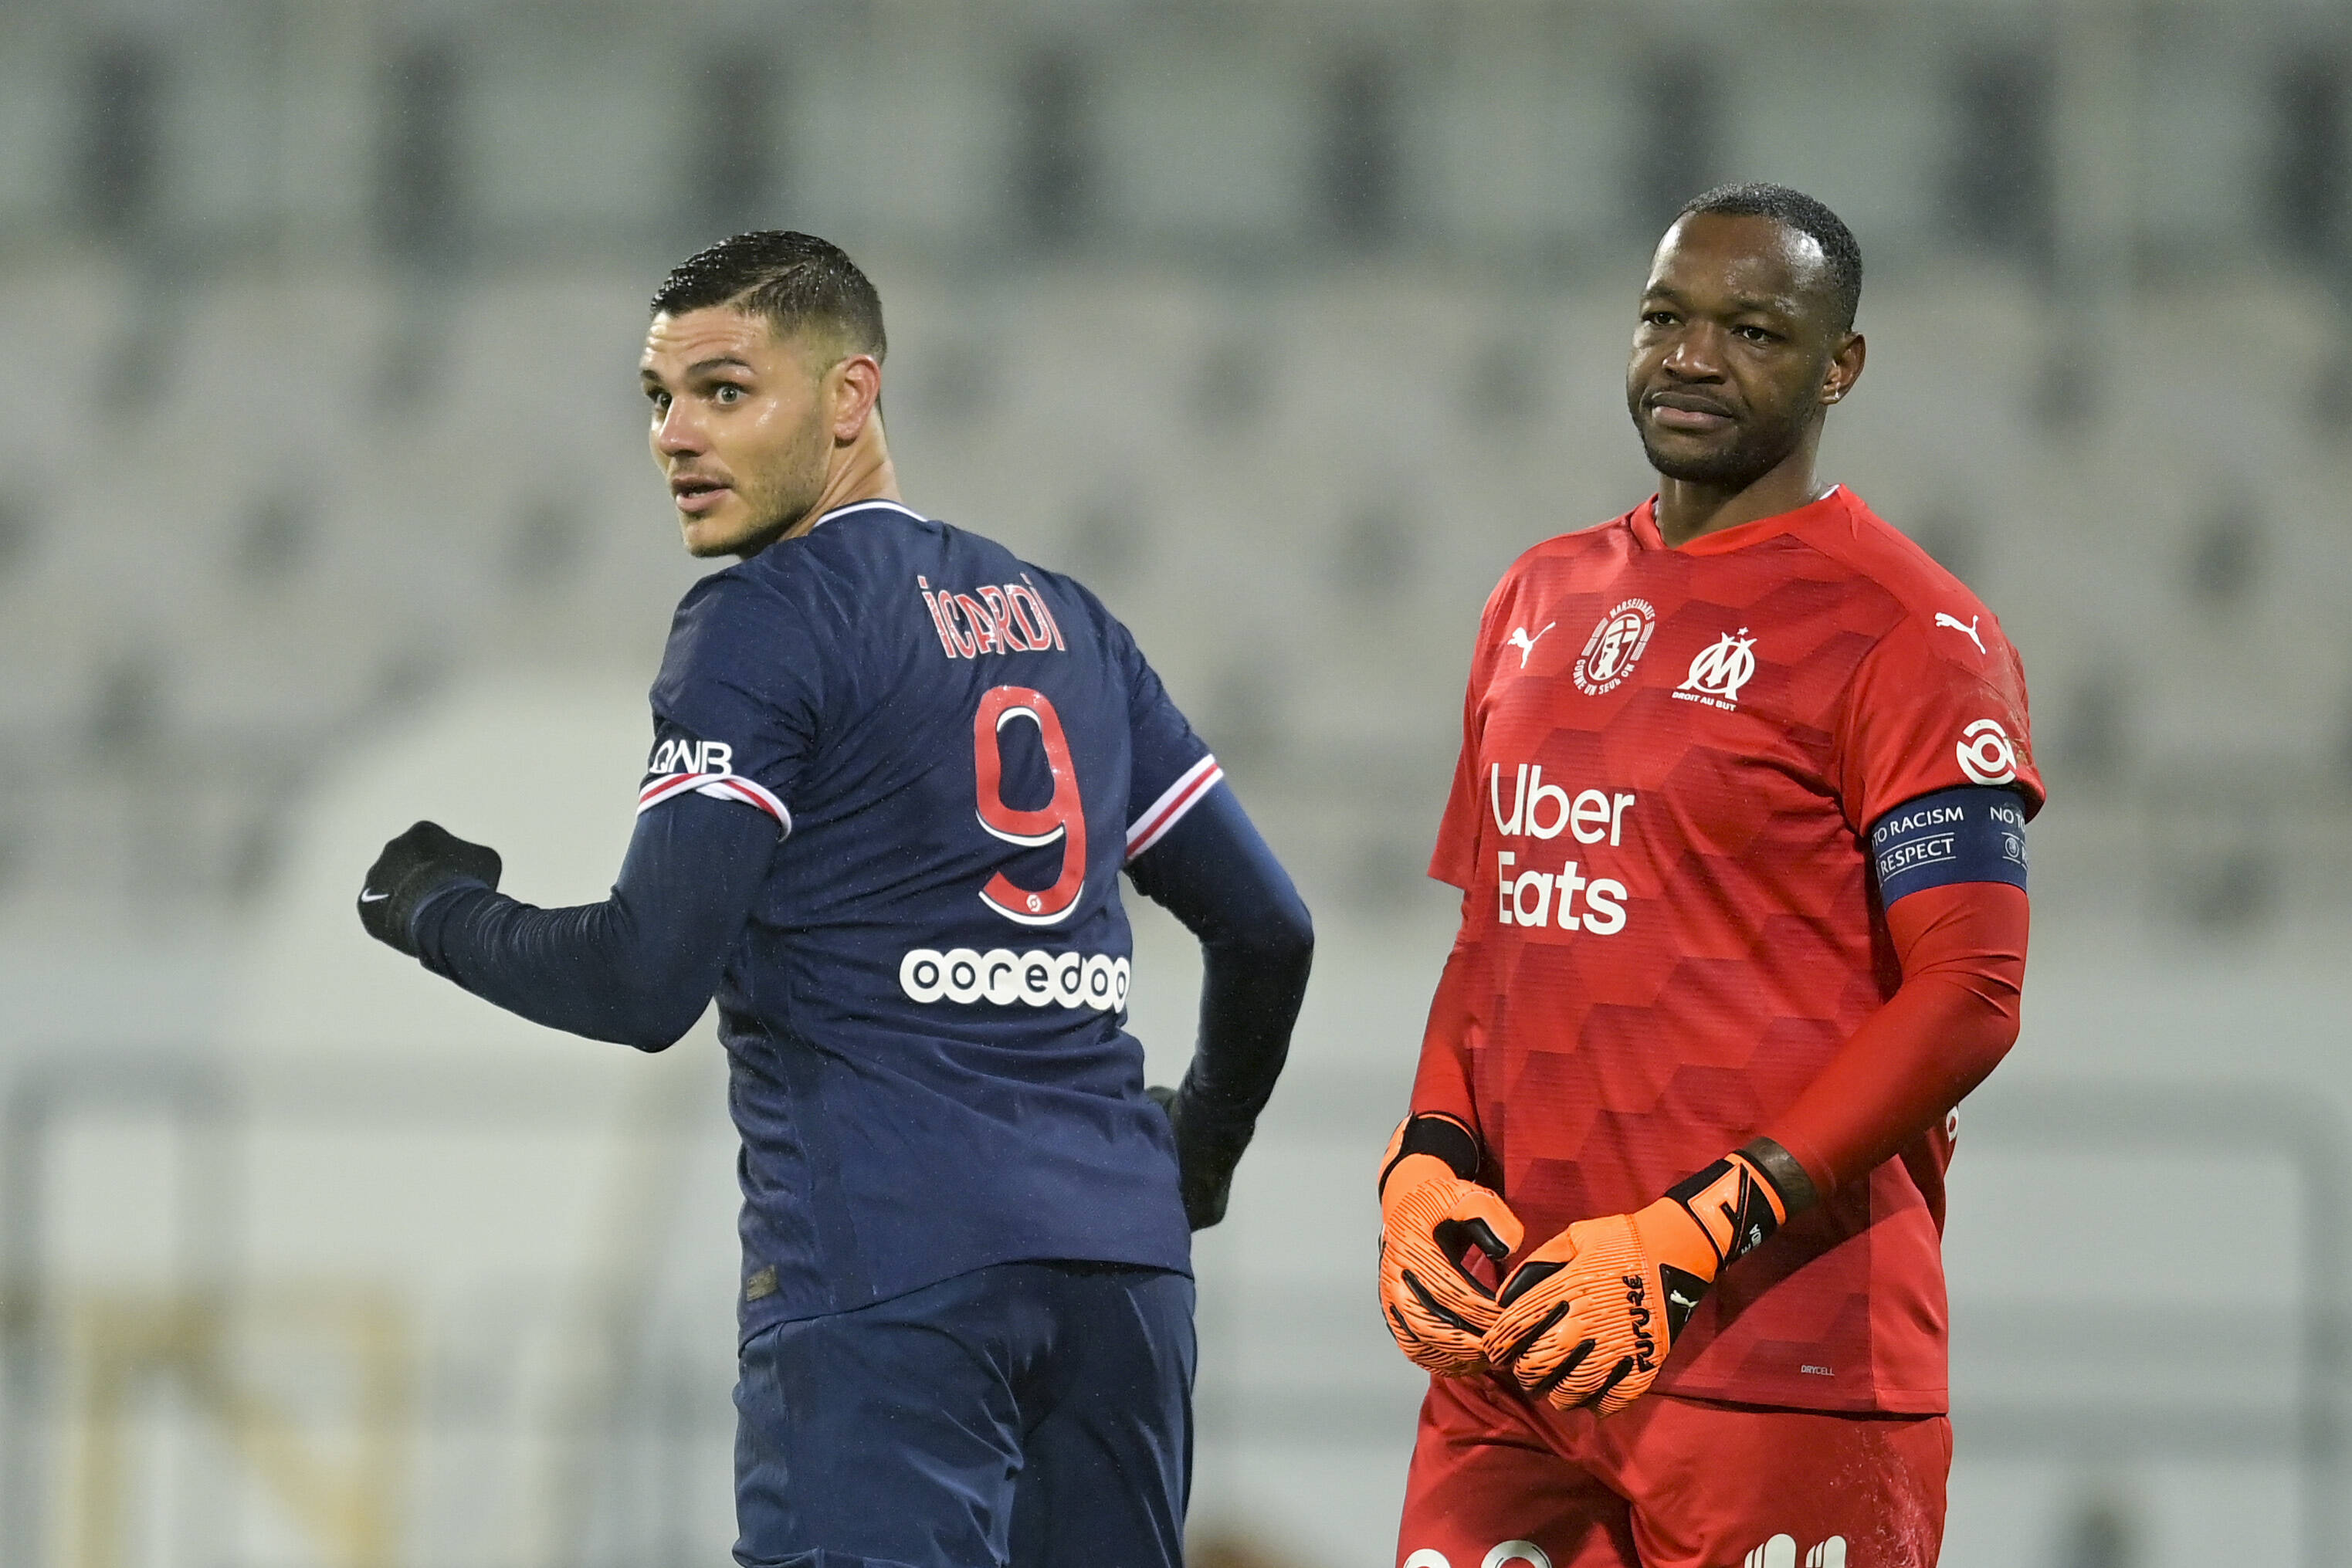 Video: ‘They Are Significant Favorites’ - Steve Mandanda on PSG Having the Upperhand Ahead of Le Classique